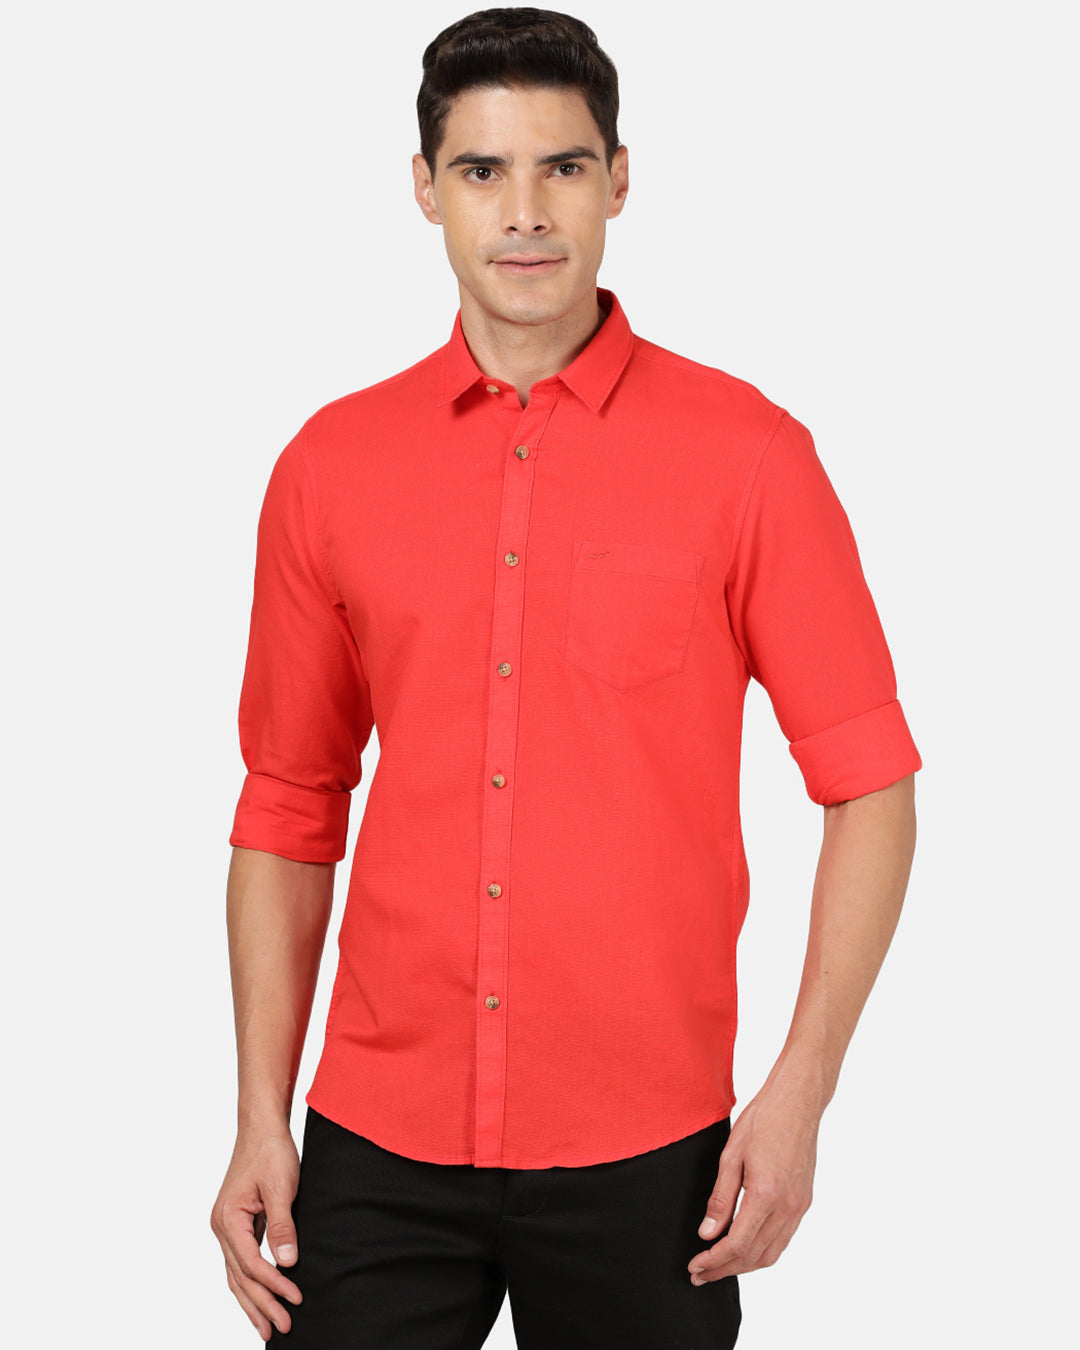 Crocodile Casual Full Sleeve Slim Fit Yarn Dyed Red with Collar Shirt for Men